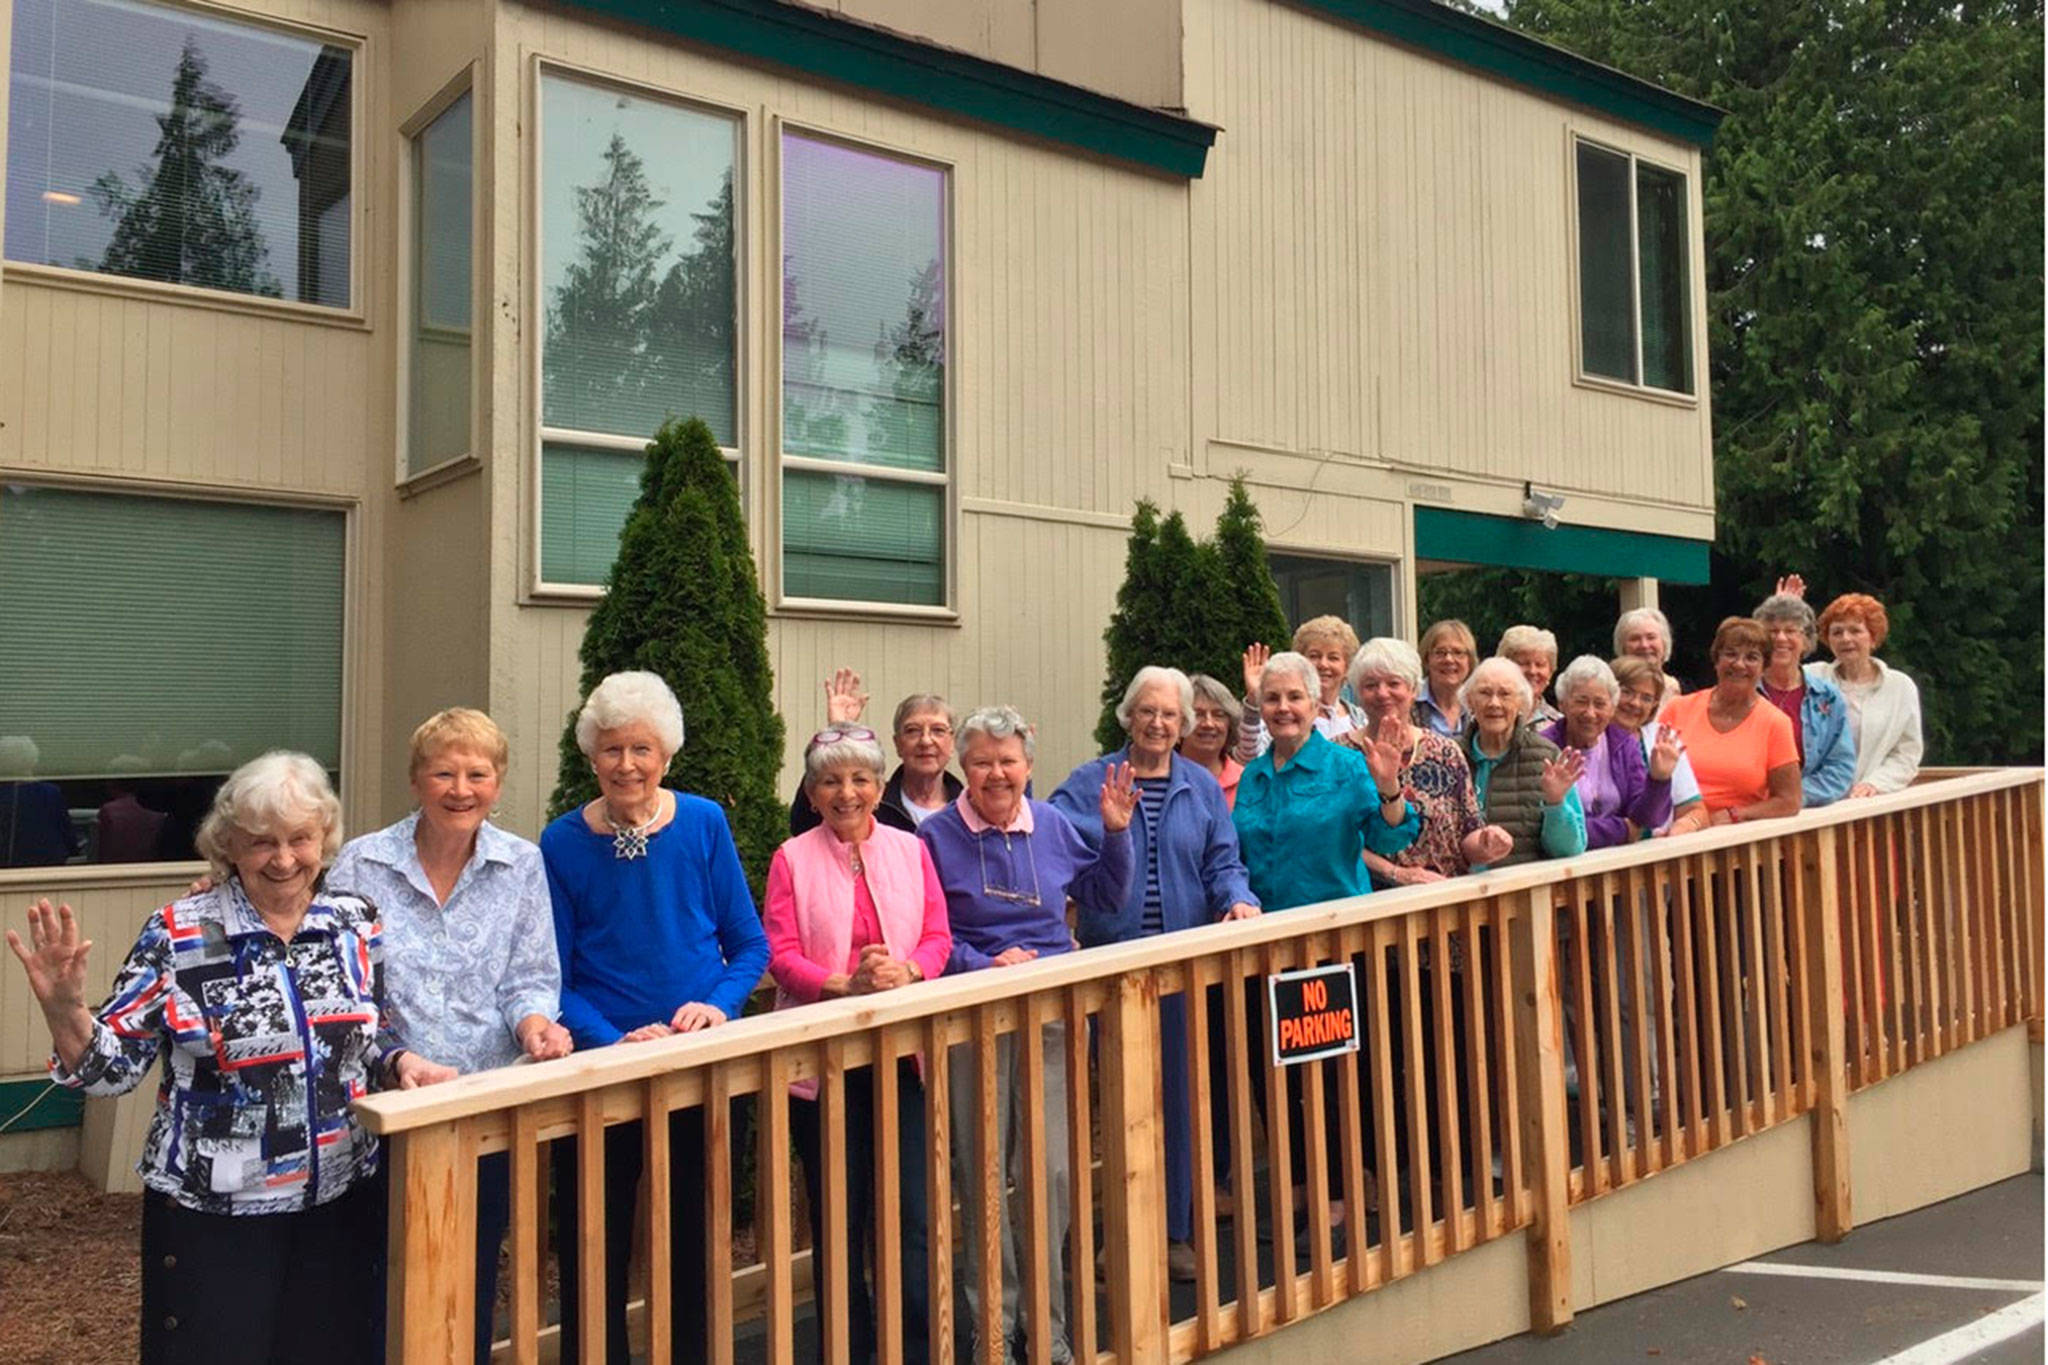 At the May event, some of Sunland’s Sunshiners gathered for a photo to celebrate 16 years together. The group started affiliated with the Red Hat Society in 2002 and went off on its own as the Sunshiners seven years later to raise funds for community efforts. Submitted photo